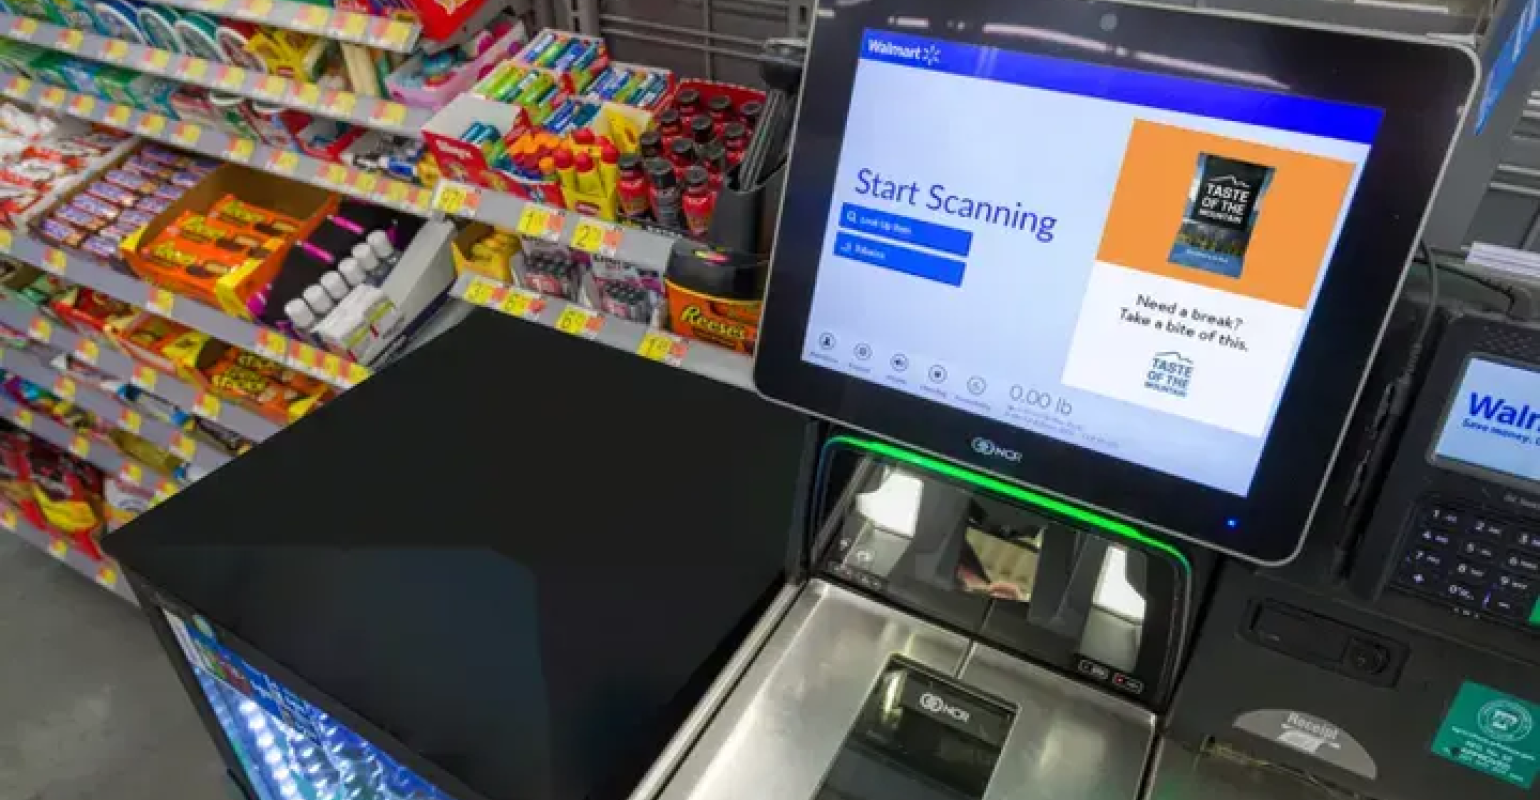 Walmart now targeting self-checkout with ads | Supermarket News